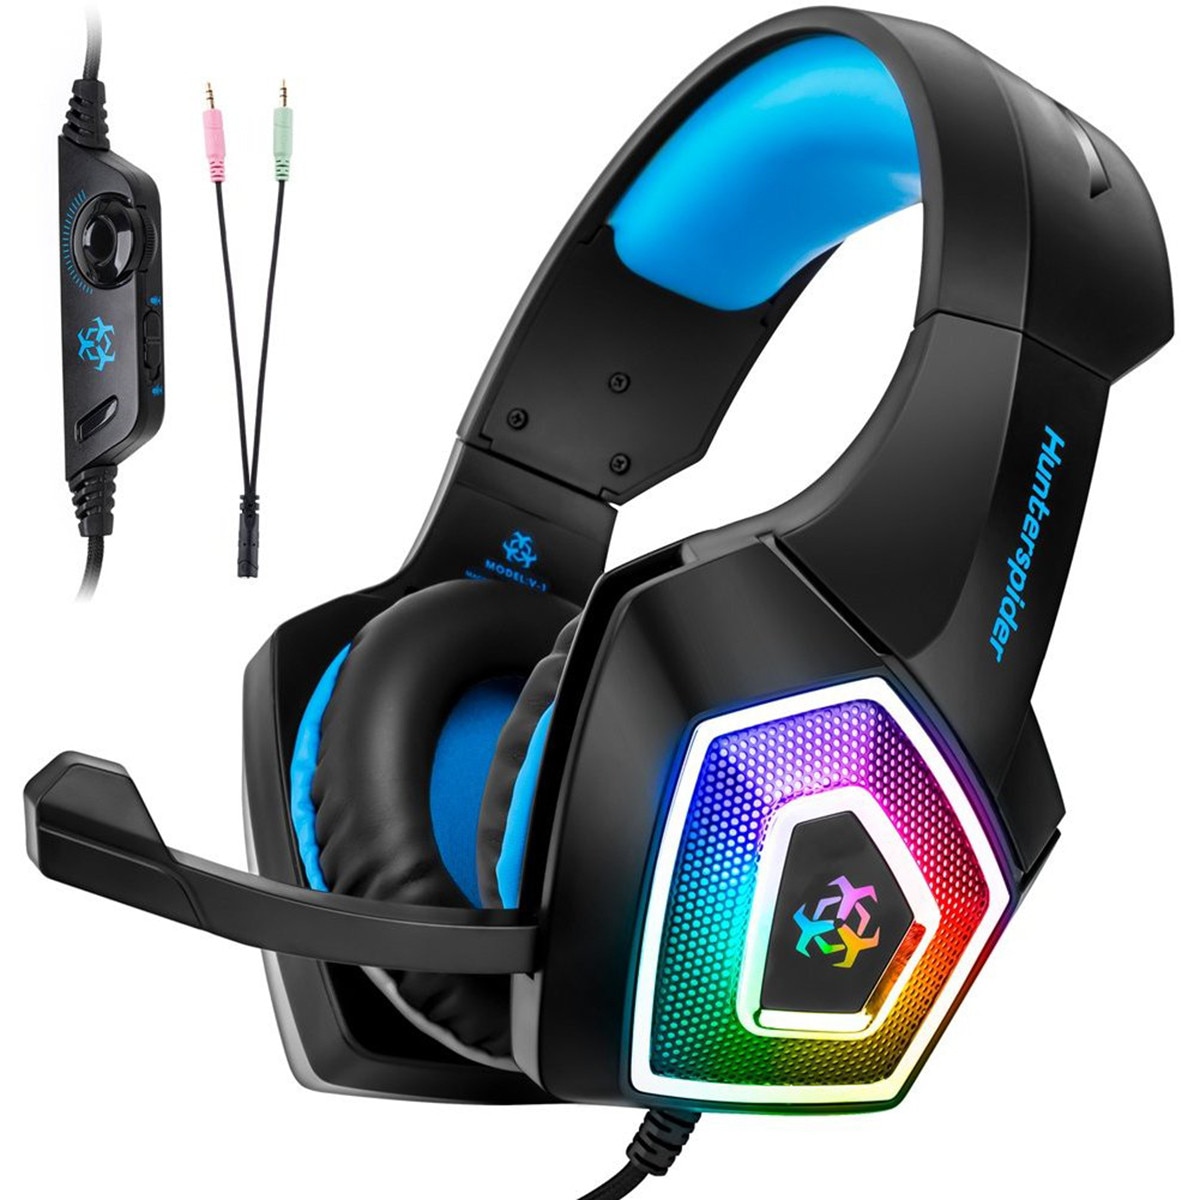 Stereo Gaming Headset with Microphone for Xbox One, PS4 and PC, USB Gaming Headphone with 7.1 Surround Sound, LED Light & Noise Canceling Mic, Soft Memory Earmuffs for Nintendo Switch Laptop Mac Games  Dude Best Gadgets